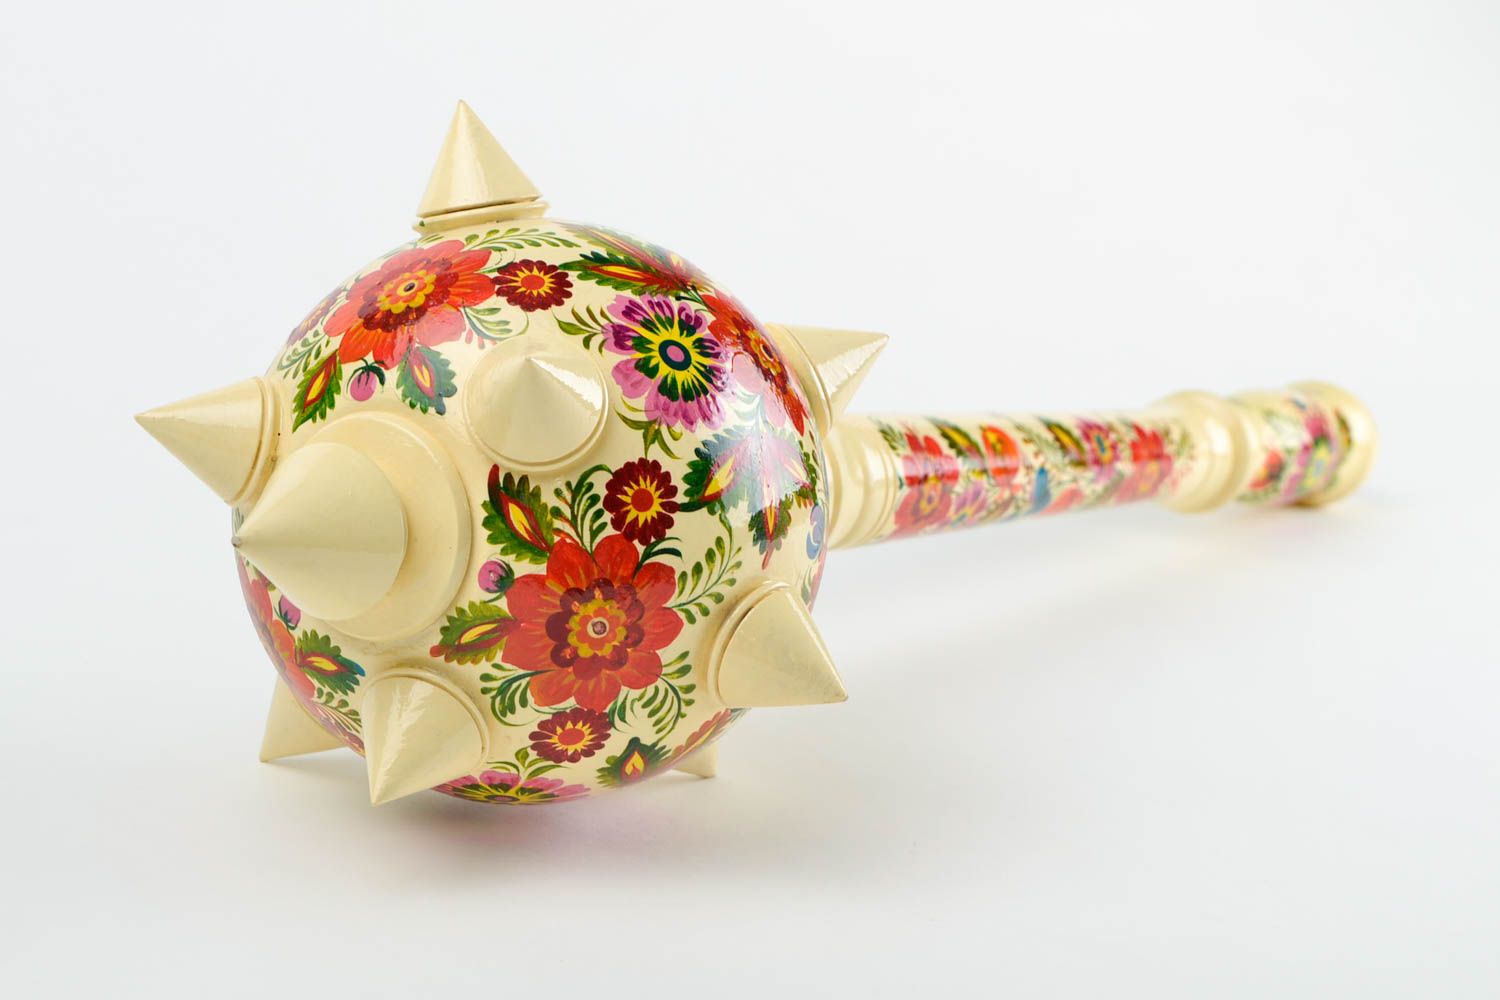 Handmade wooden mace weapon decorative painted mace decorative use only photo 2